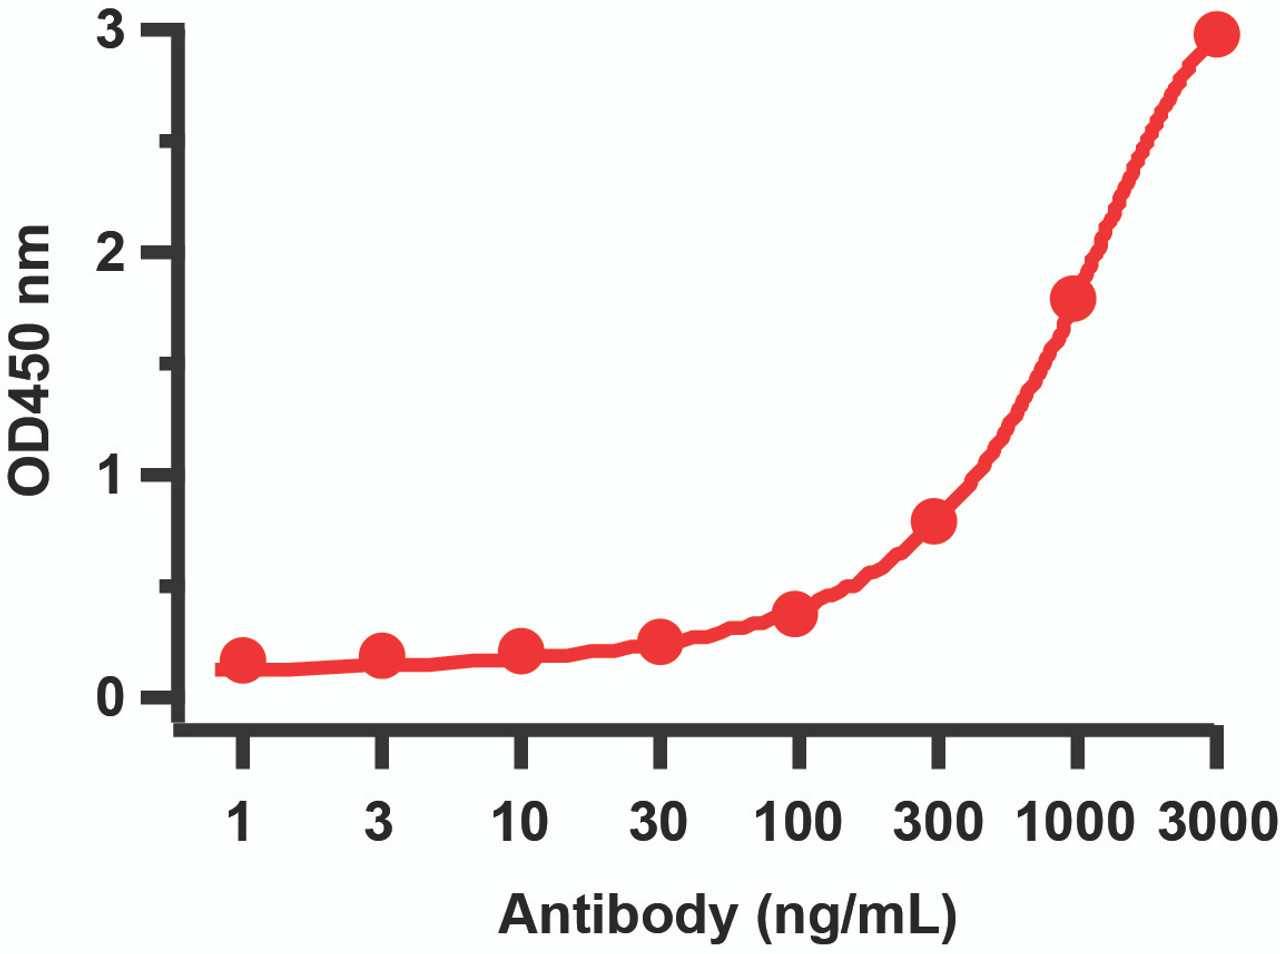 Figure 1 ELISA Validation with SARS-CoV-2 (COVID-19) 3CL-PRO (NSP5) Protein 
Antibodies: SARS-CoV-2 (COVID-19) 3CL-PRO (NSP5) Antibody, 9151. A direct ELISA was performed using SARS-CoV-2 3CL-PRO (NSP5) recombinant protein (10-400) as coating antigen and the anti-SARS-CoV-2 (COVID-19) 3CL-PRO (NSP5) antibody as the capture antibody. Secondary: Goat anti-rabbit IgG HRP conjugate at 1:20000 dilution. Detection range is from 1 ng/mL to 3000 ng/mL